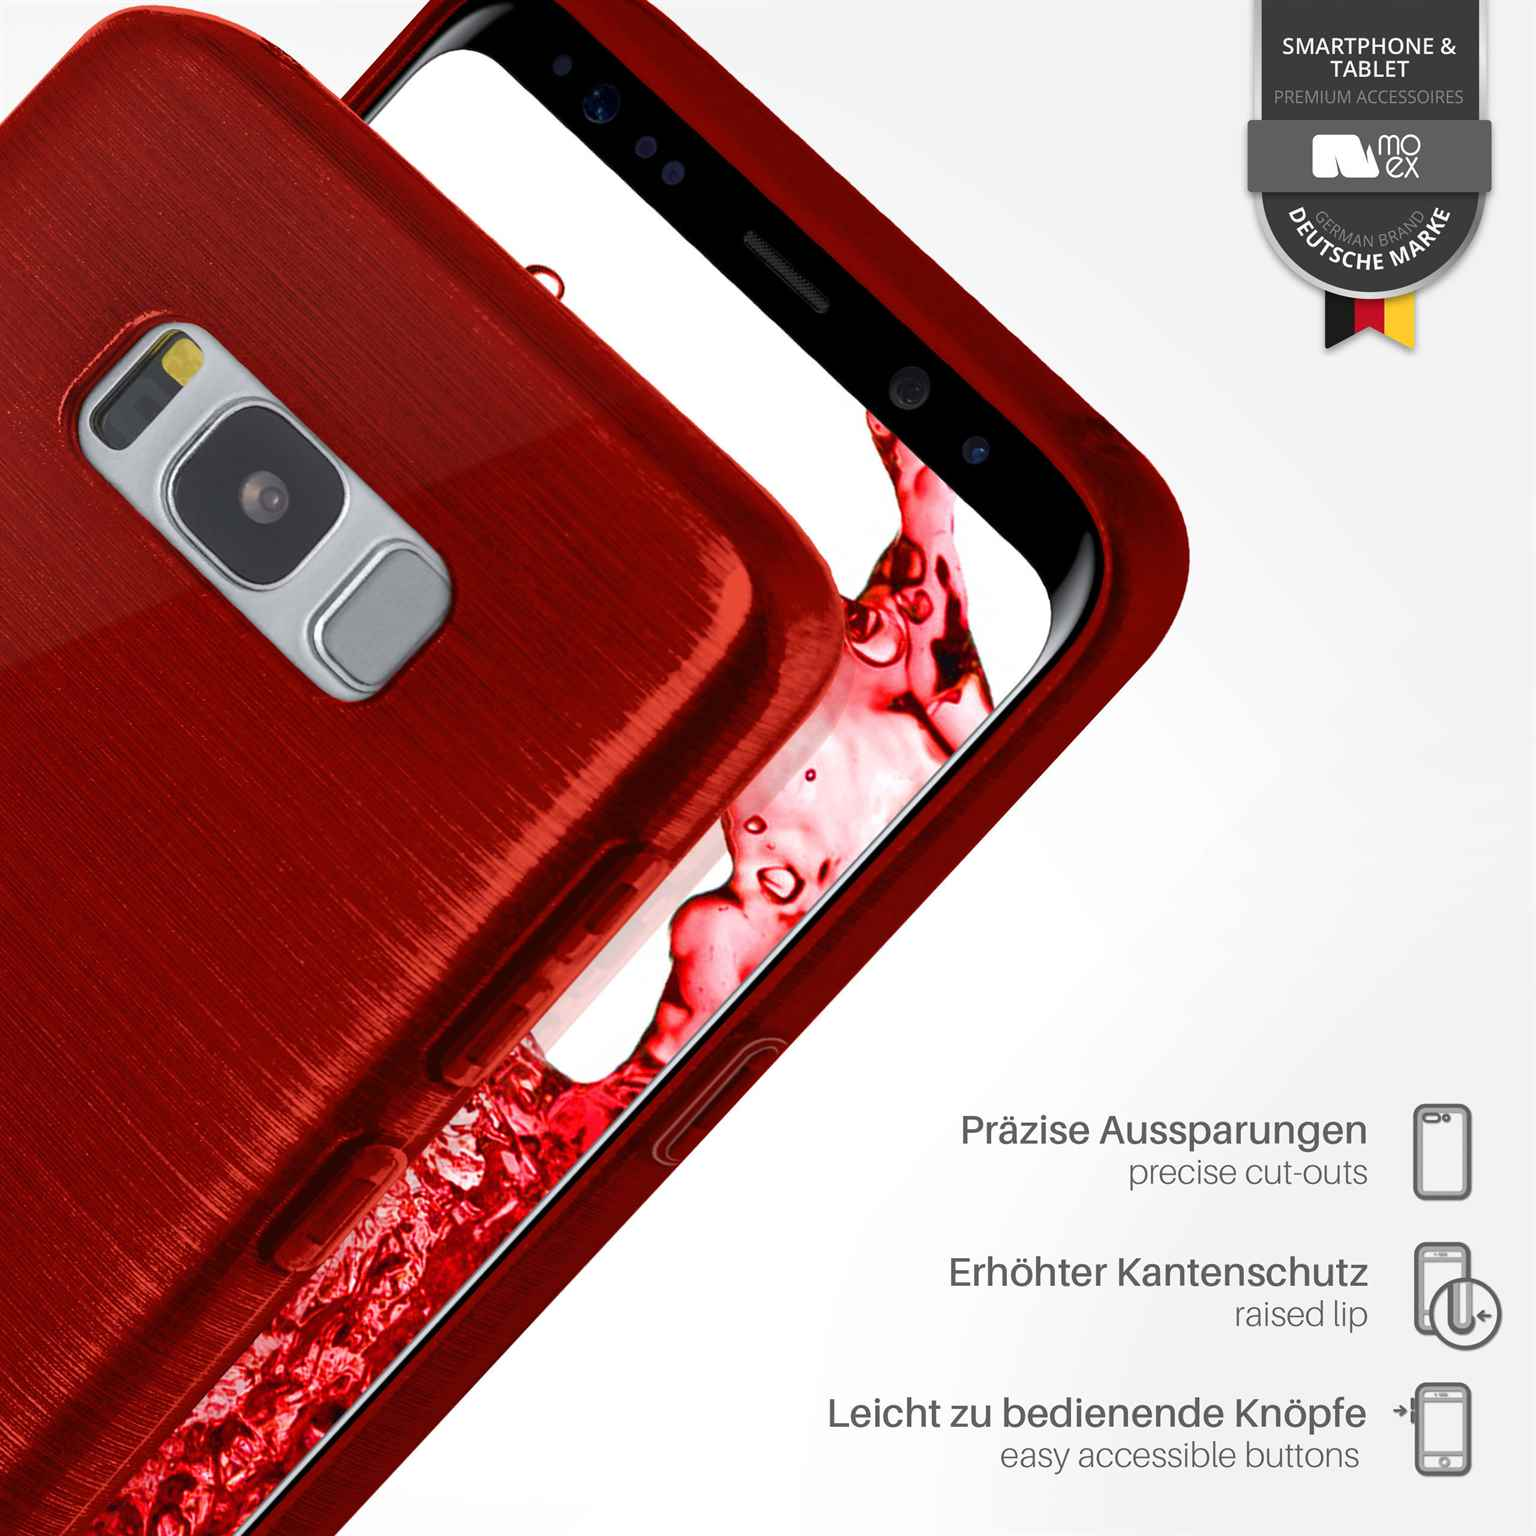 MOEX Brushed Case, Galaxy Backcover, Samsung, Crimson-Red Plus, S8